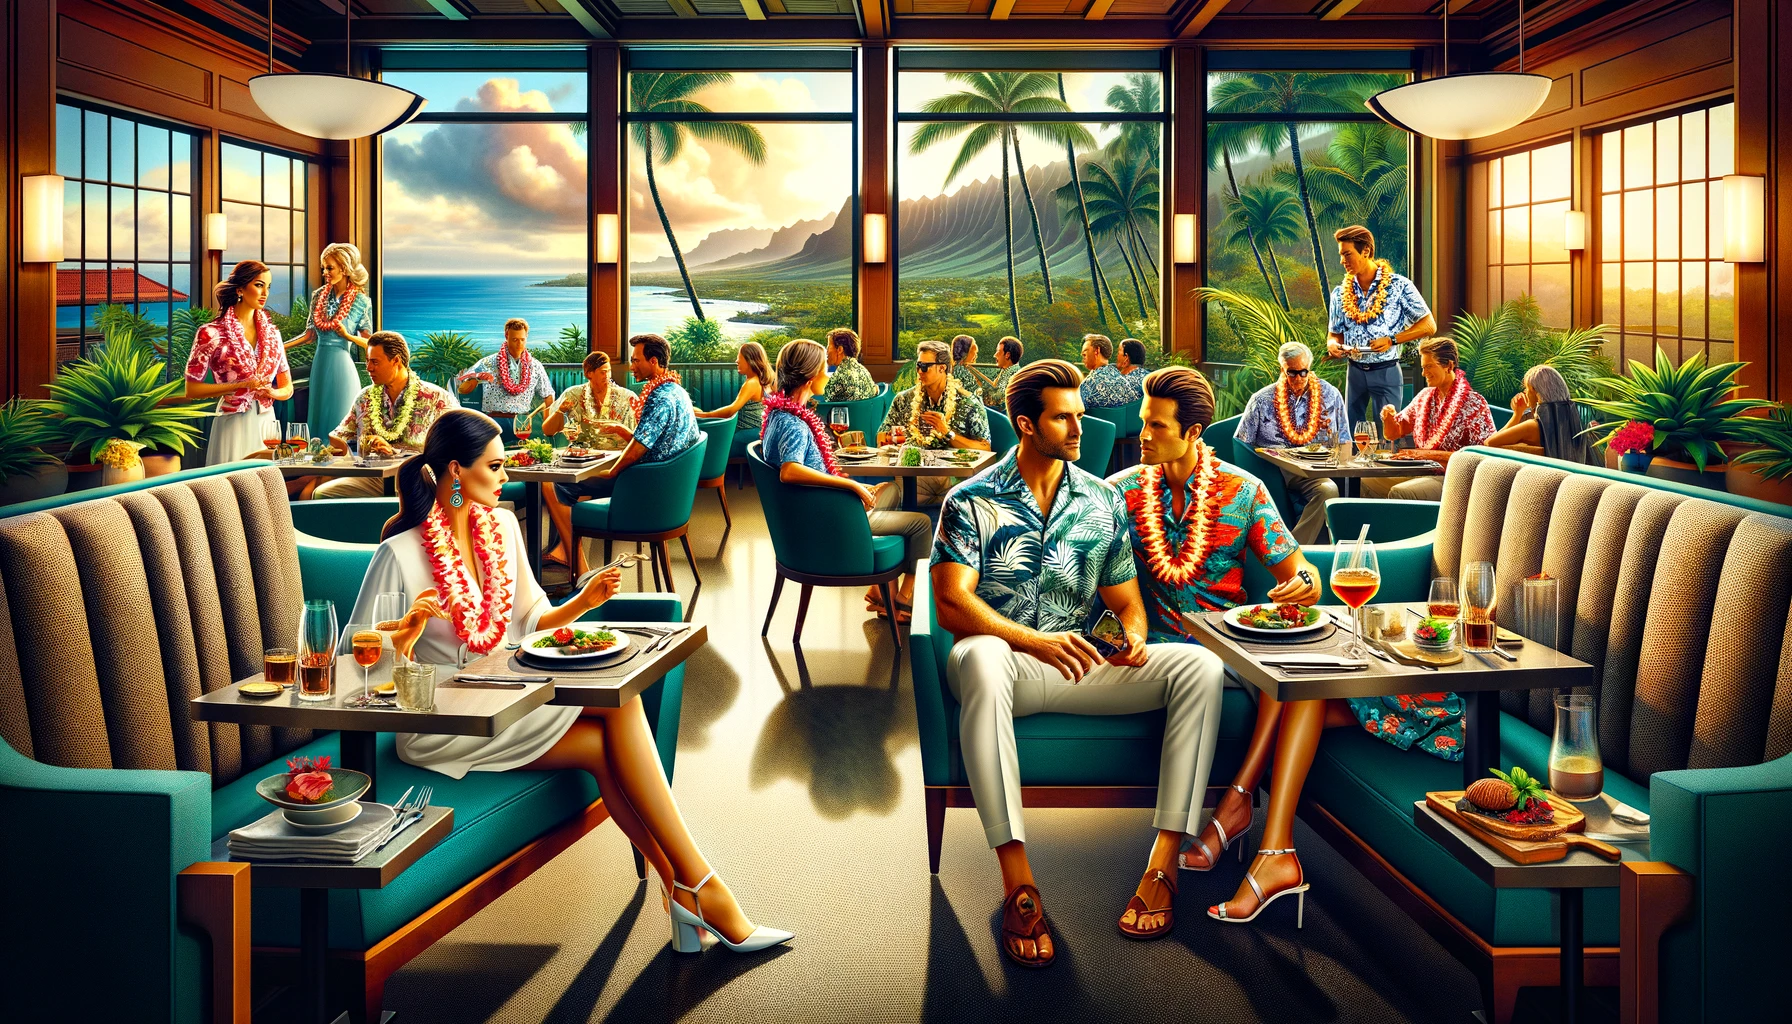 A vibrant and sophisticated dining scene at Wolfgang's Steakhouse in Hawaii, capturing the essence of smart casual dress code with a tropical touch. The image includes diners enjoying their meal, with men in stylish aloha shirts paired with slacks and women in elegant summer dresses or chic resort wear. The backdrop showcases a luxurious restaurant interior with tropical plants and large windows that offer a view of the Hawaiian landscape, embodying the relaxed yet upscale dining experience in Hawaii.